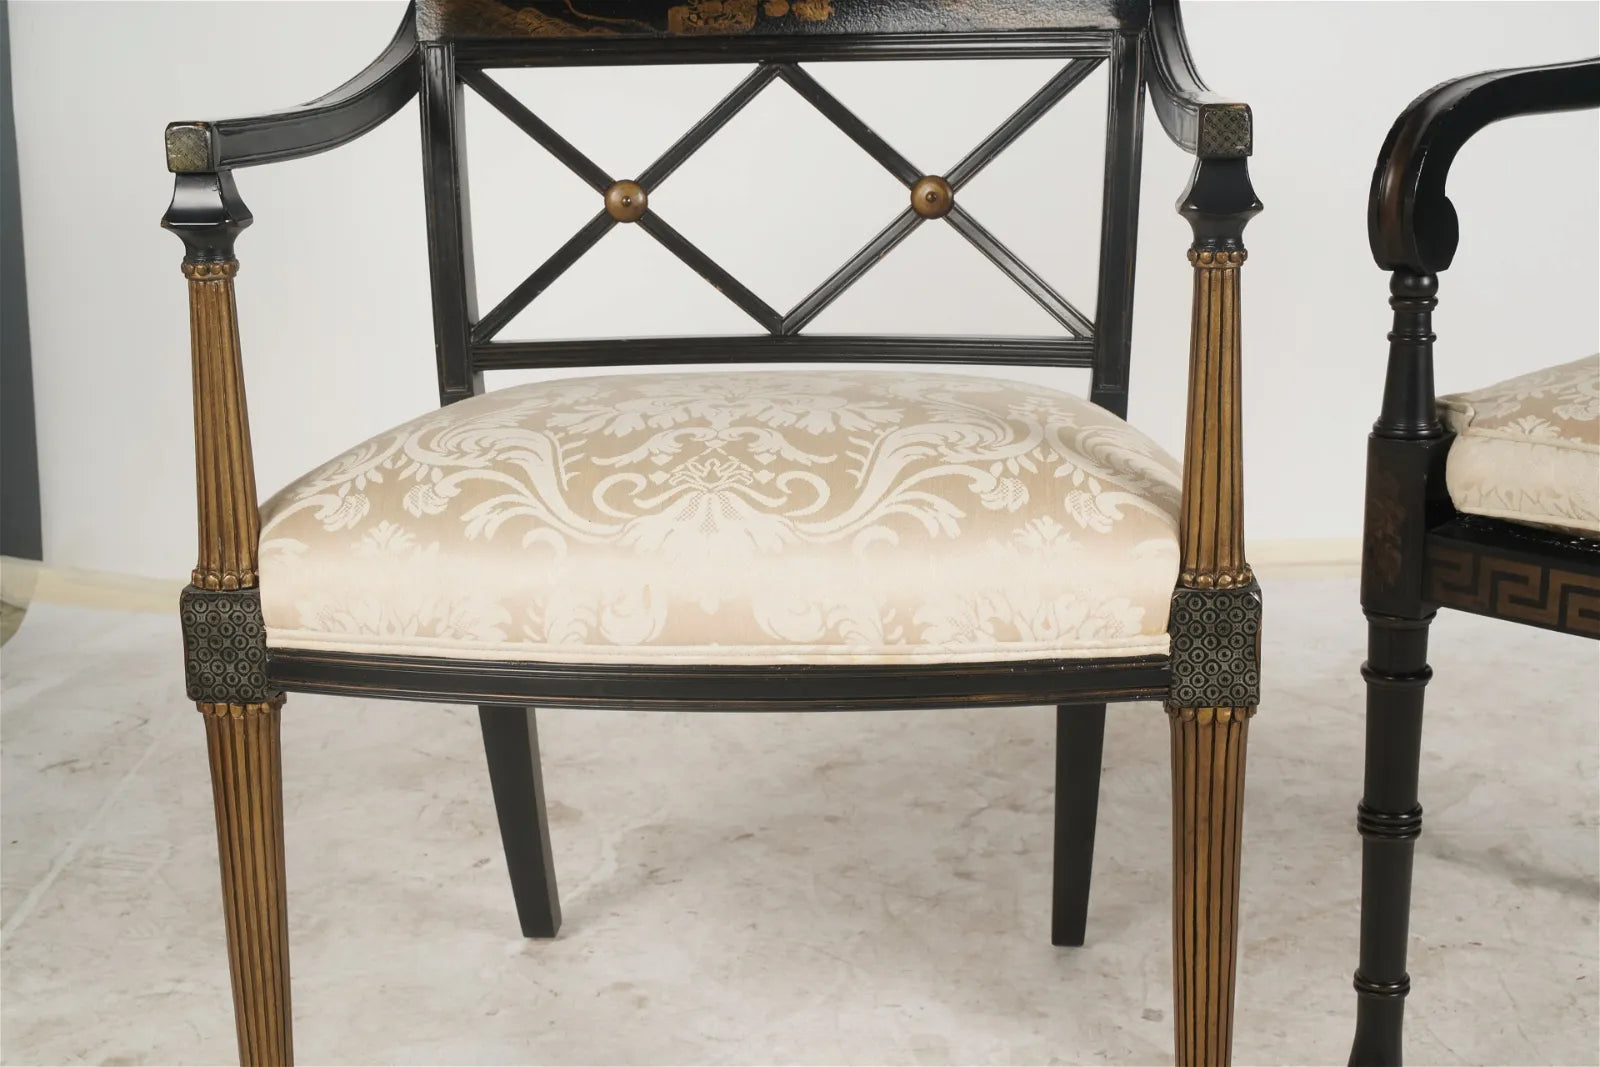 AF2-046: Antique Late 20th Century English Regency Style Chinoiserie Arm Chair